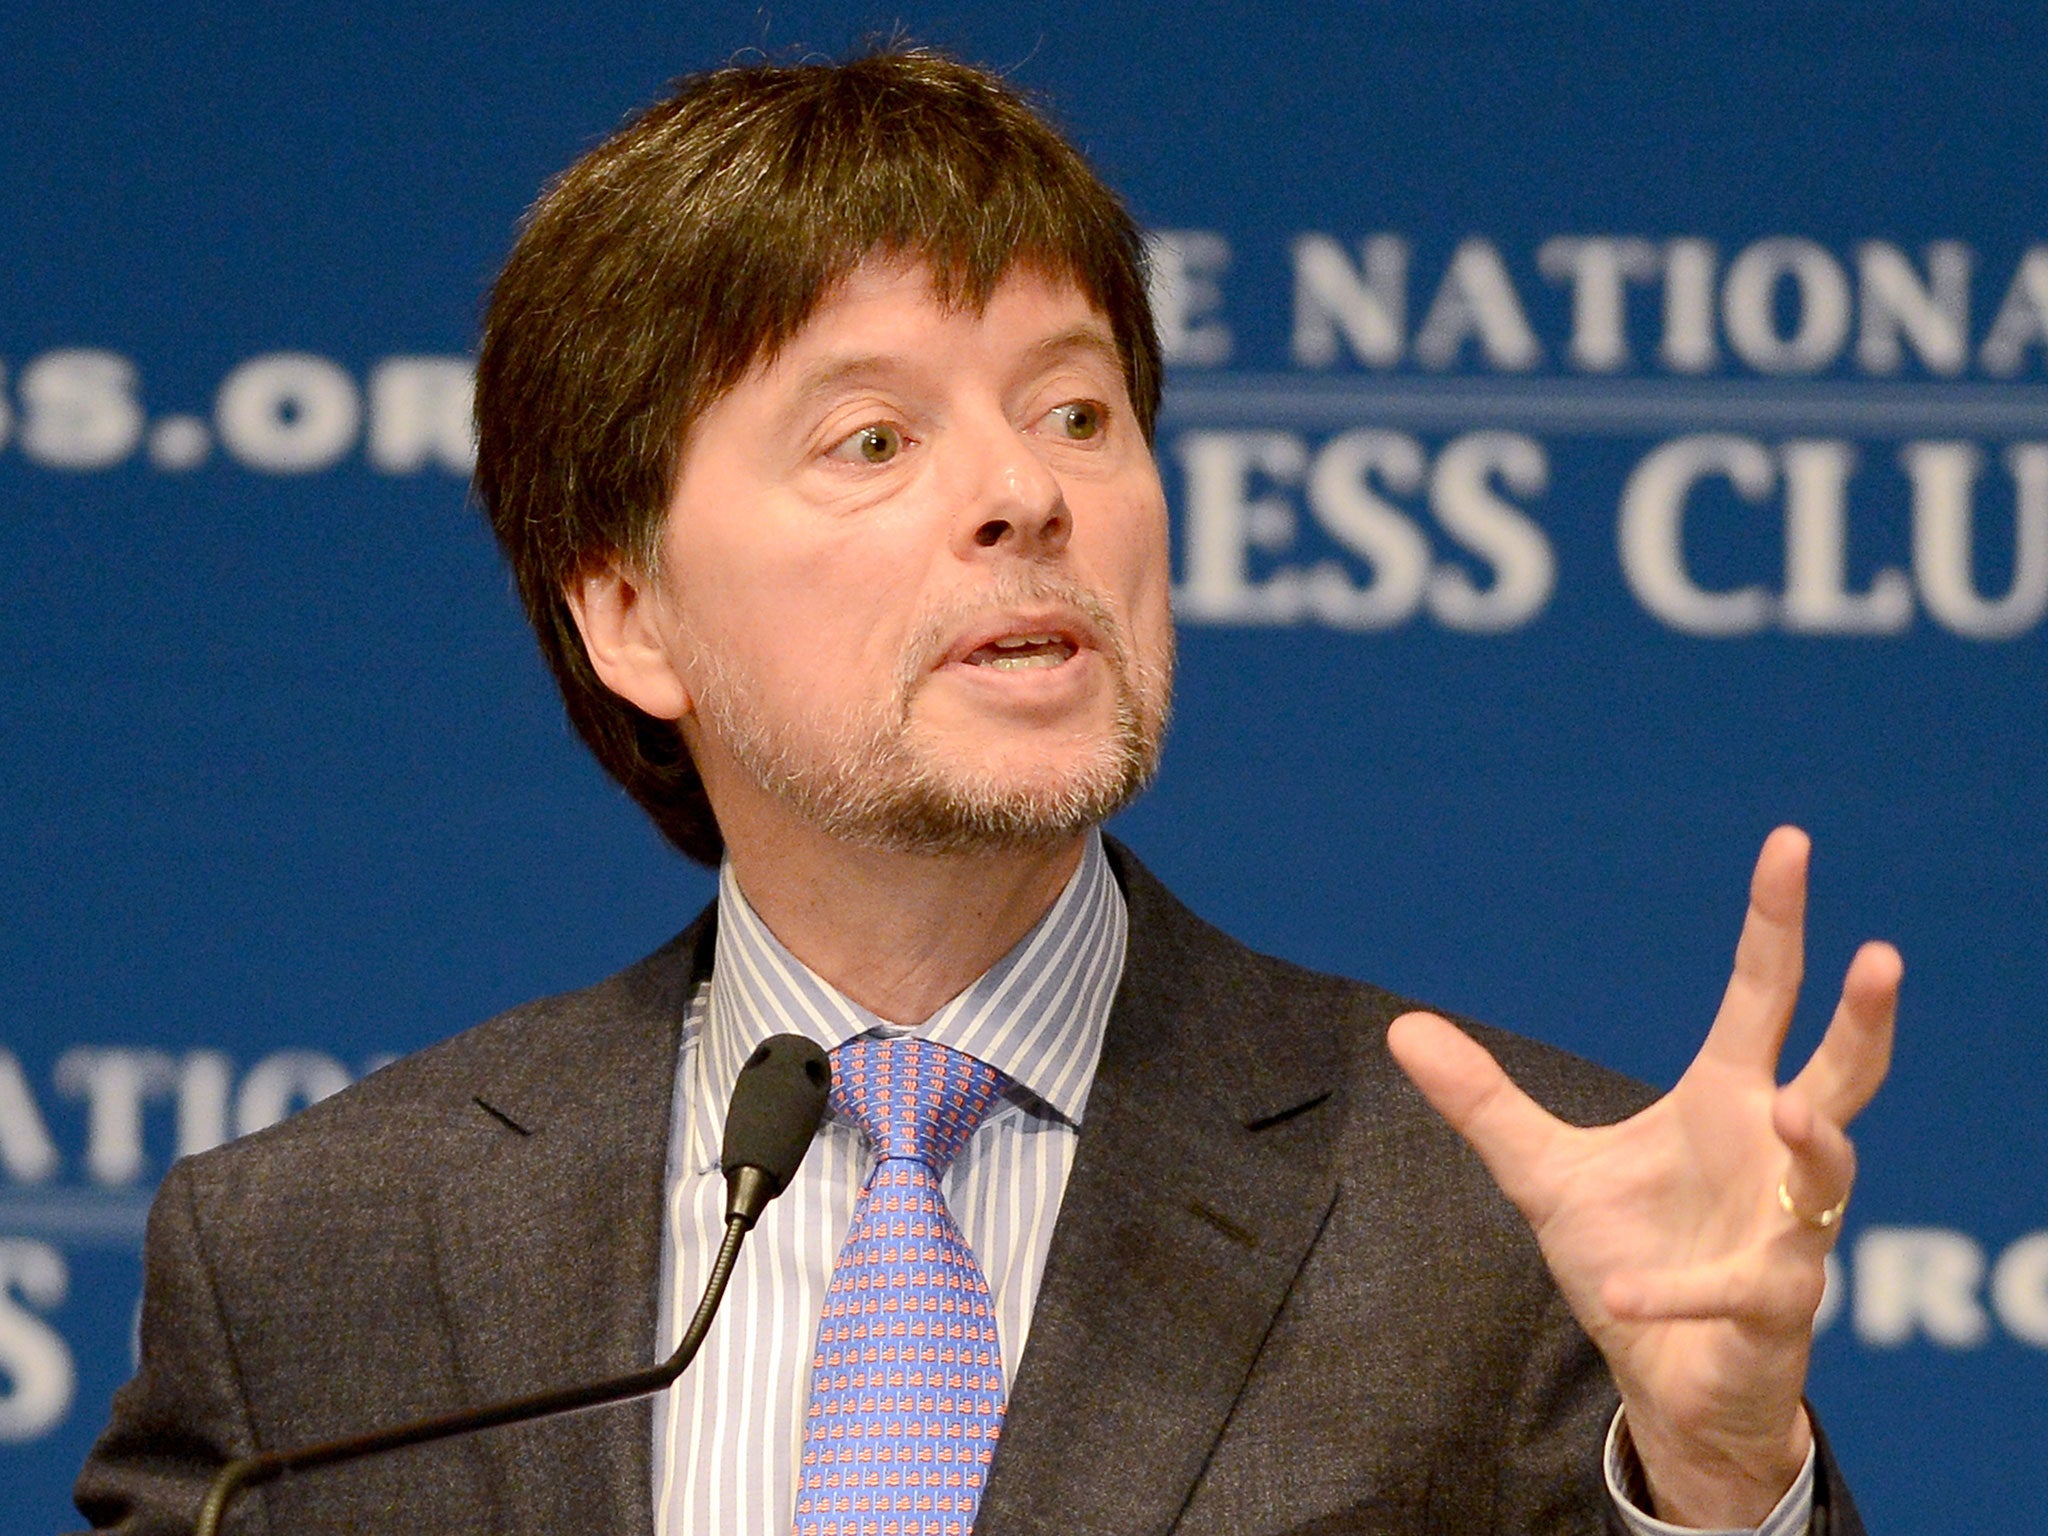 Ken Burns, one of the world’s finest factual programme makers, is used to having to raise funds and work with low overheads